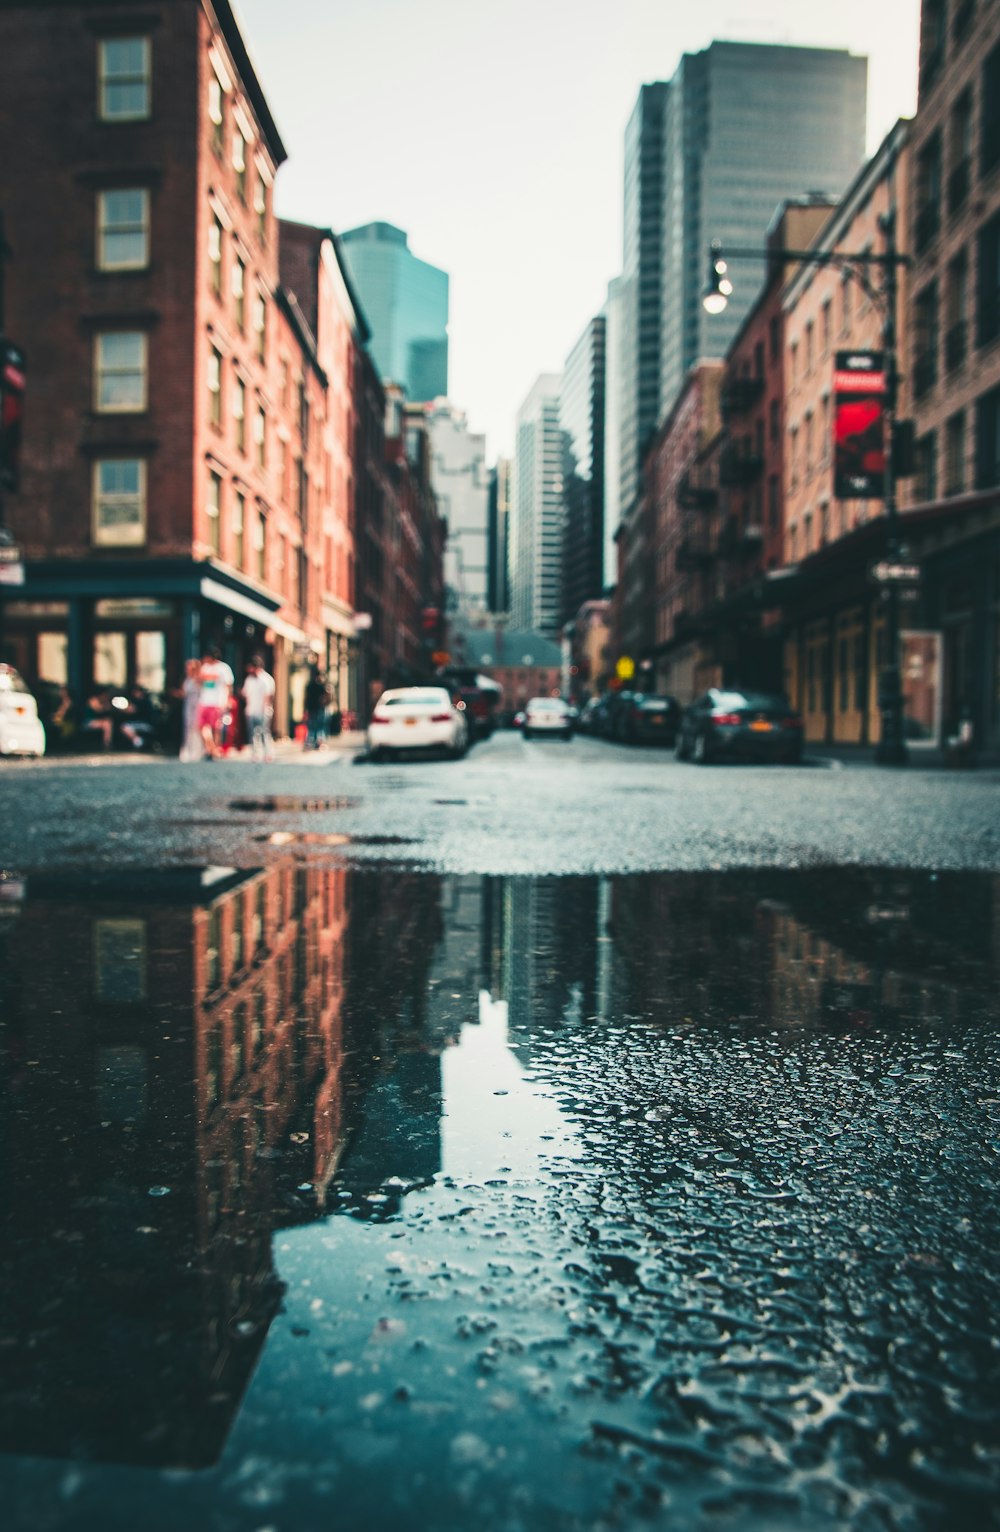 cars parked on wet city street